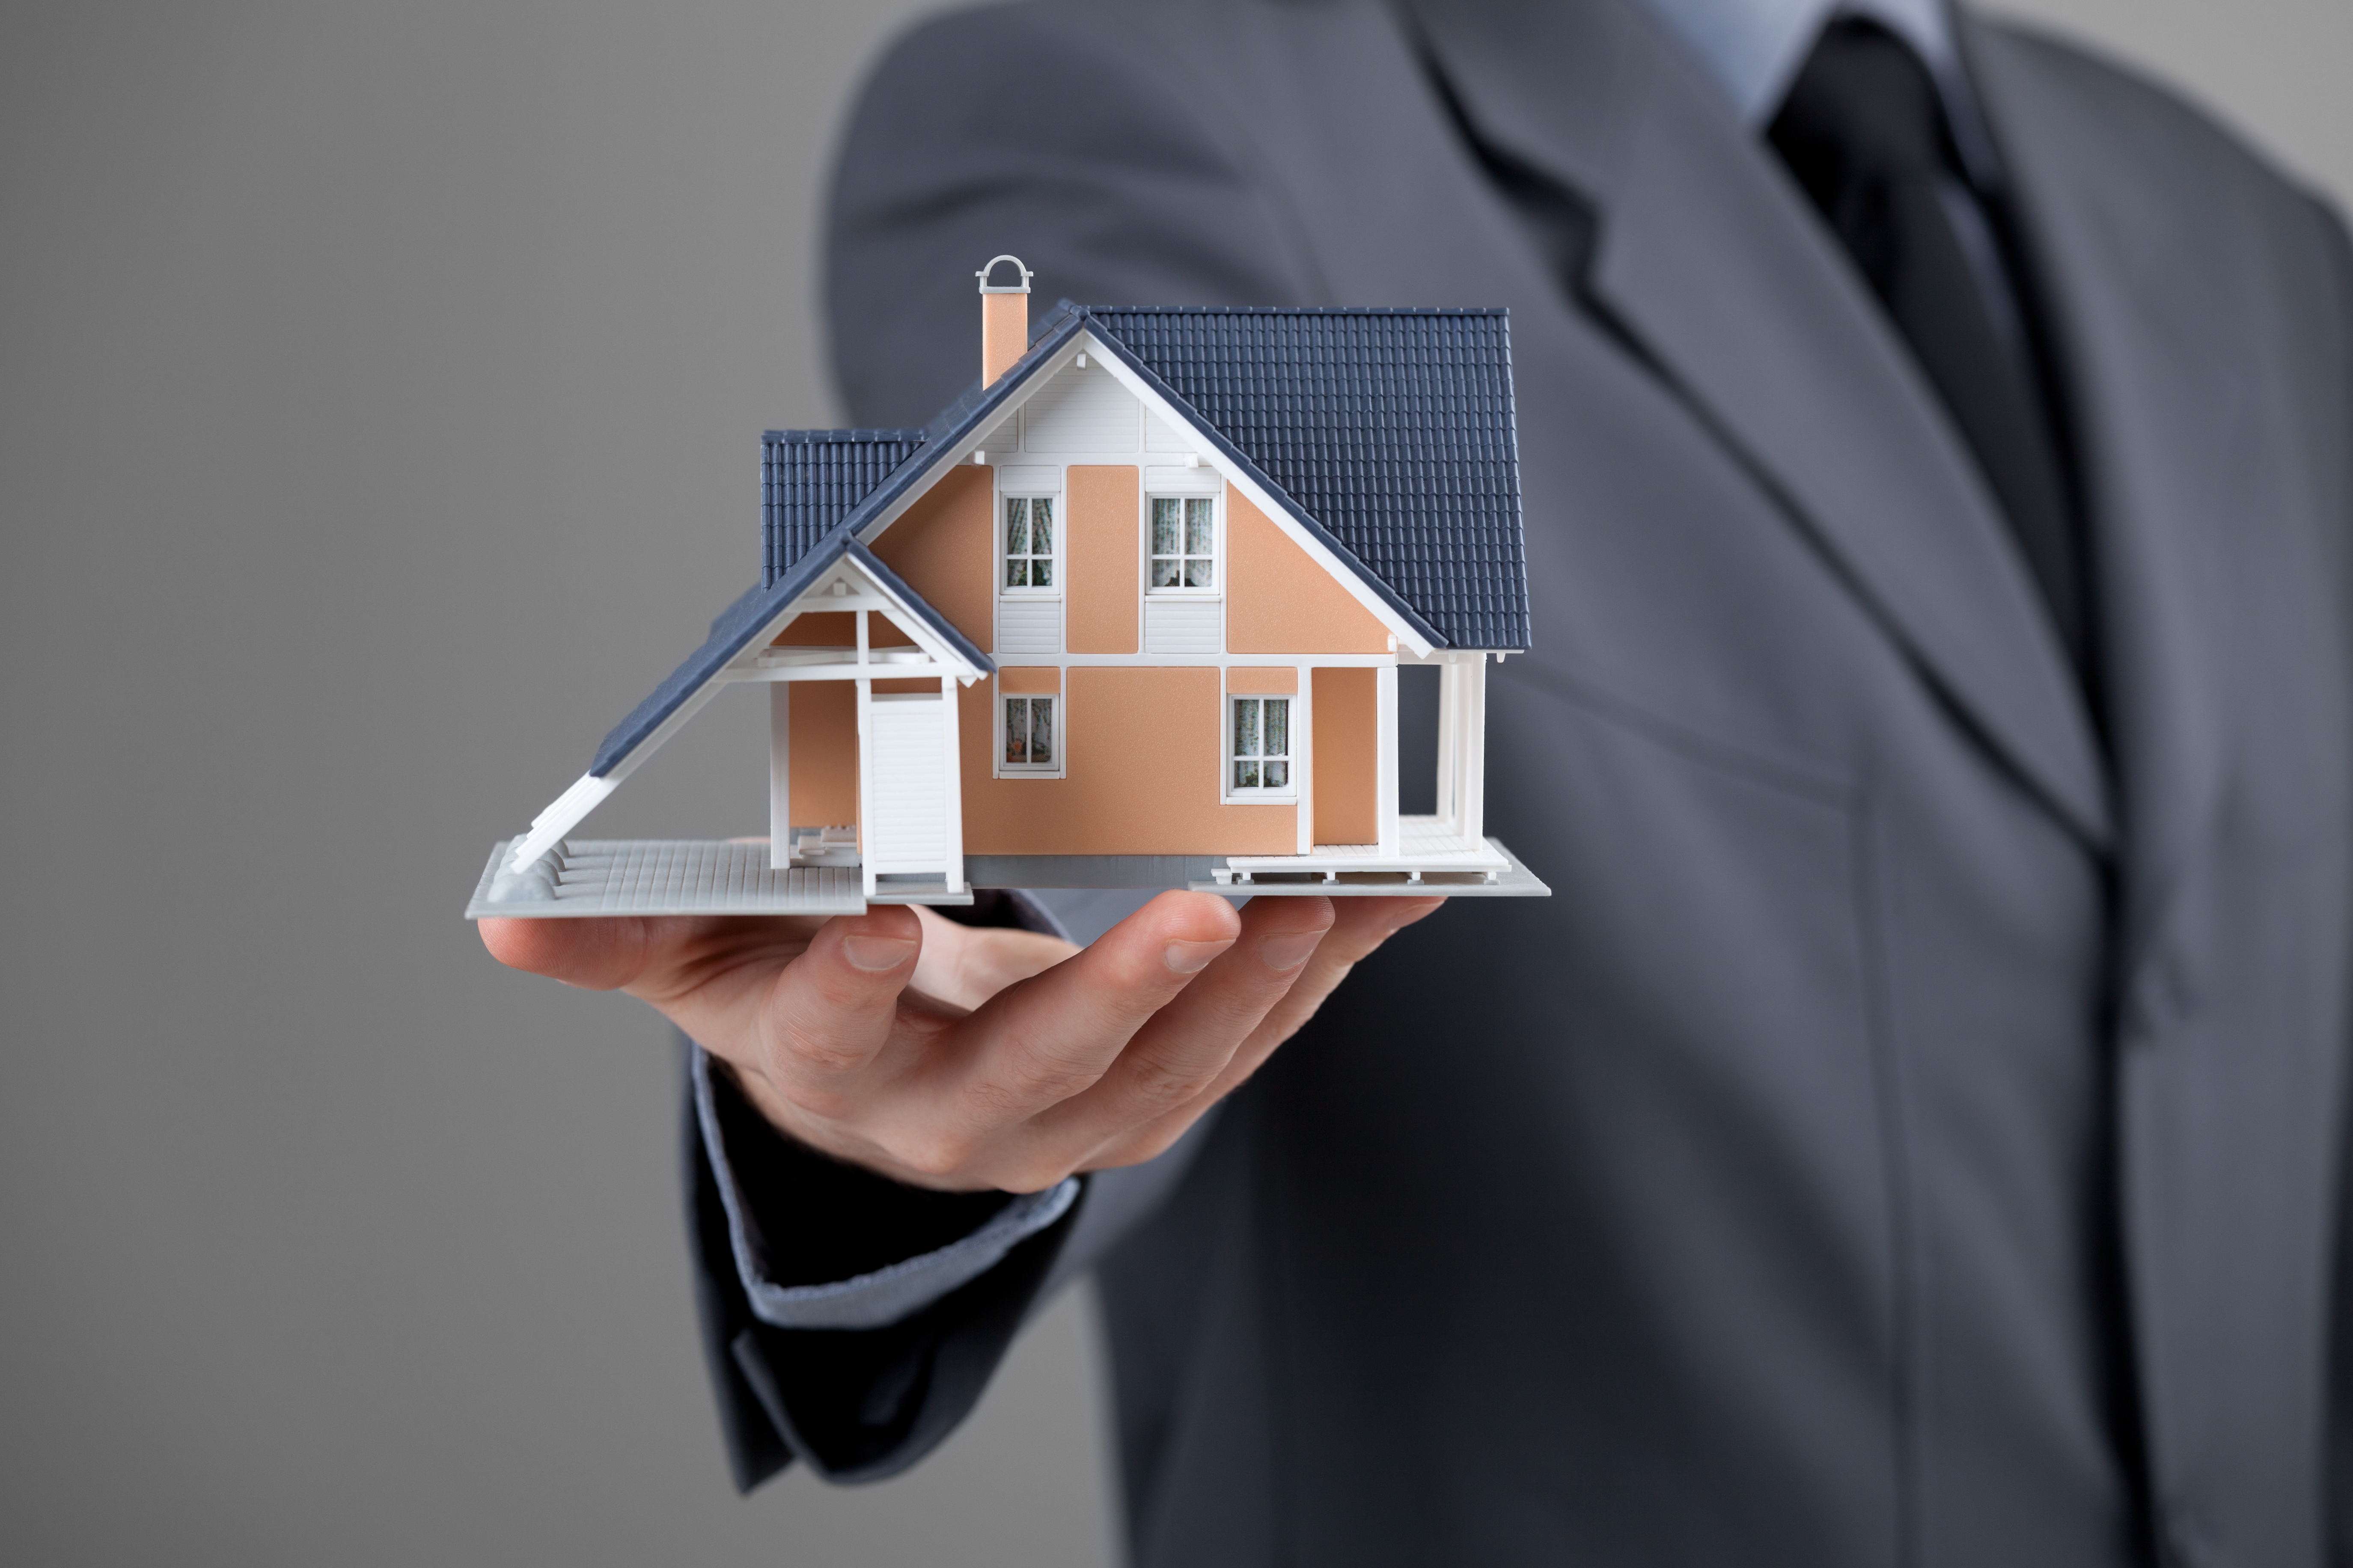 A real estate specialist is a person who consults, advertises and markets real estate products